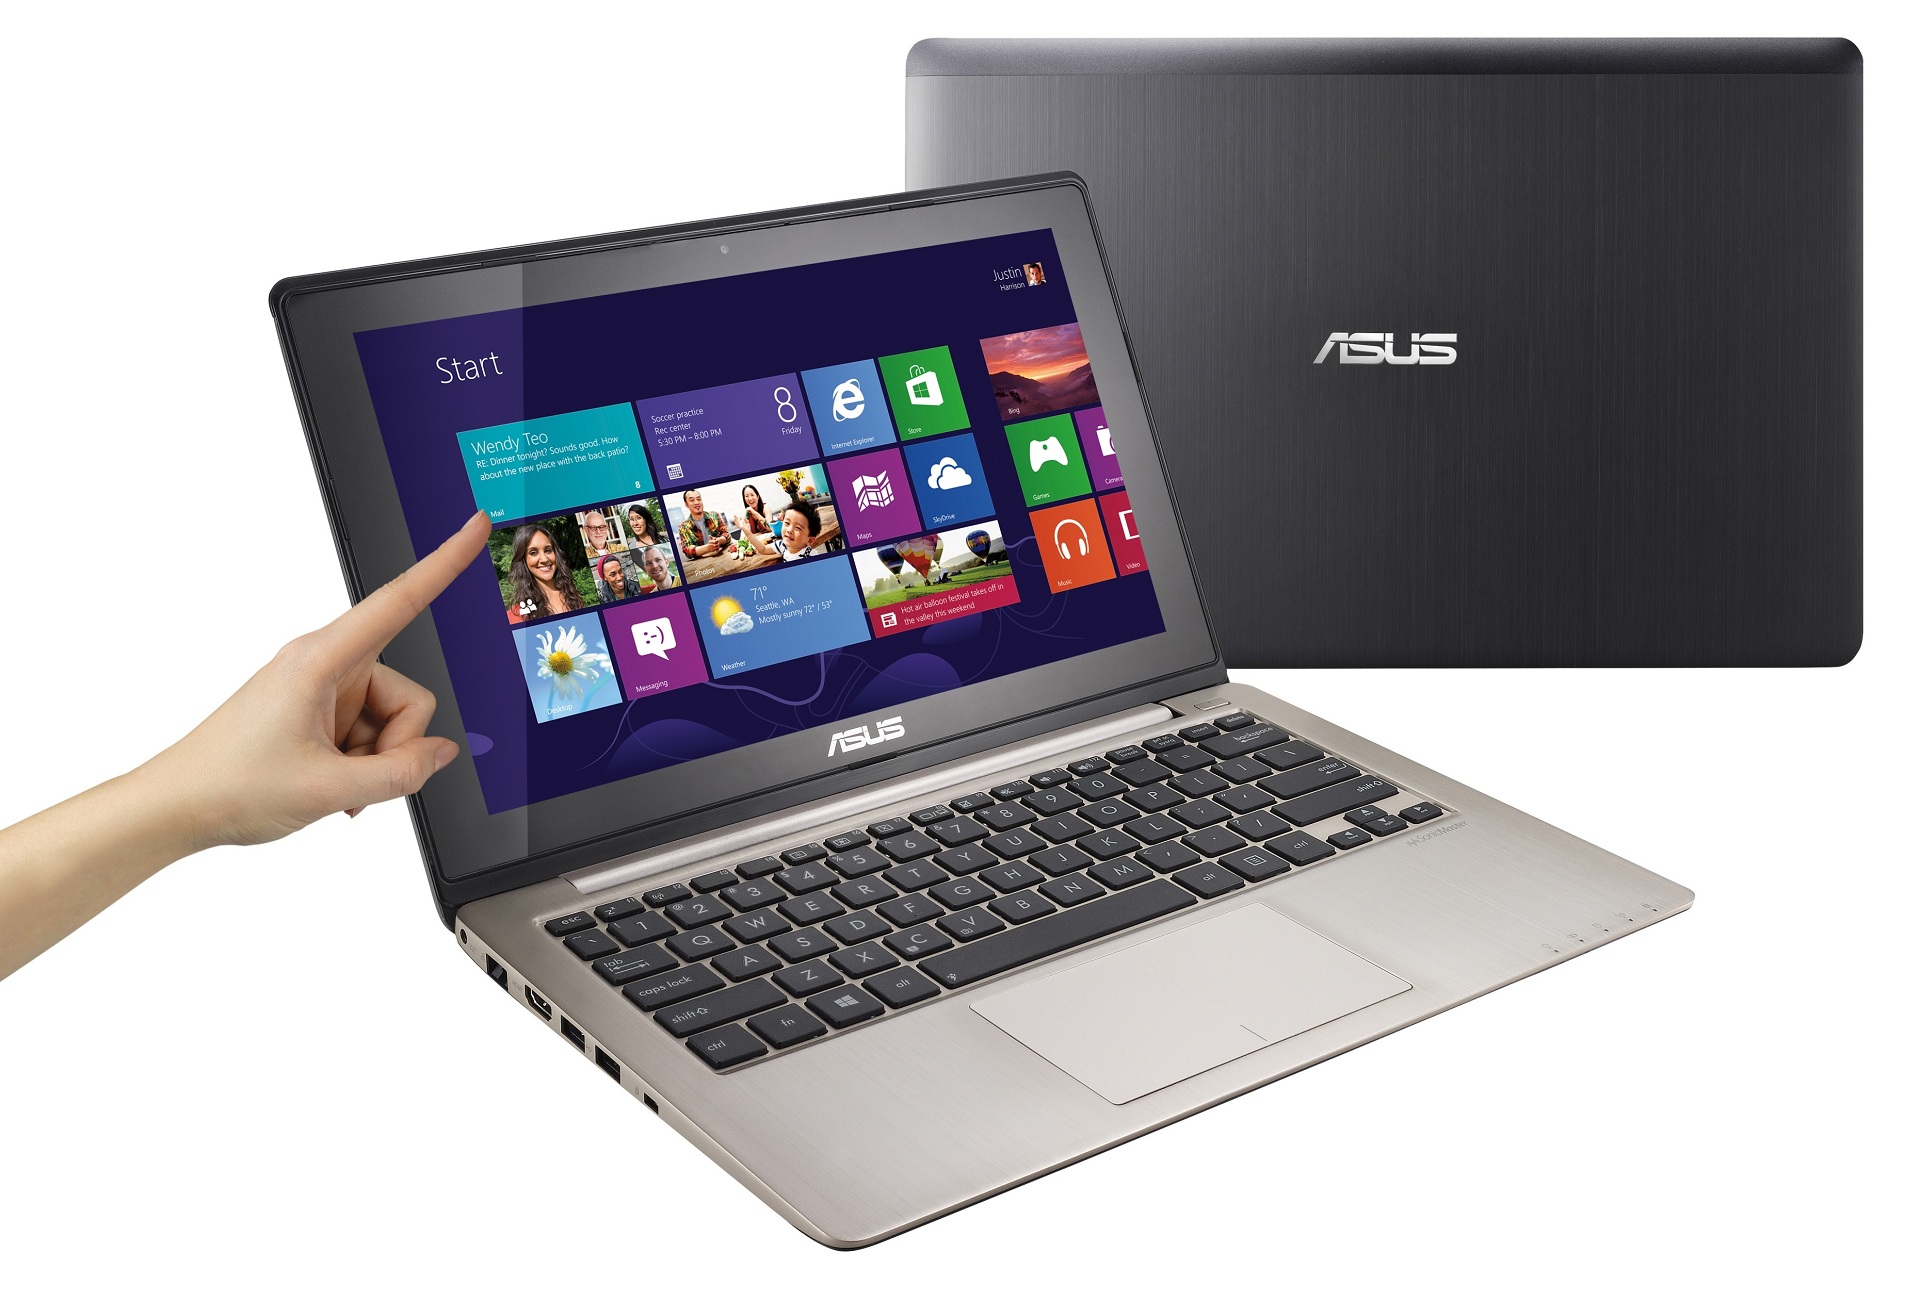 ASUS Windows 8 and RT Products Revealed